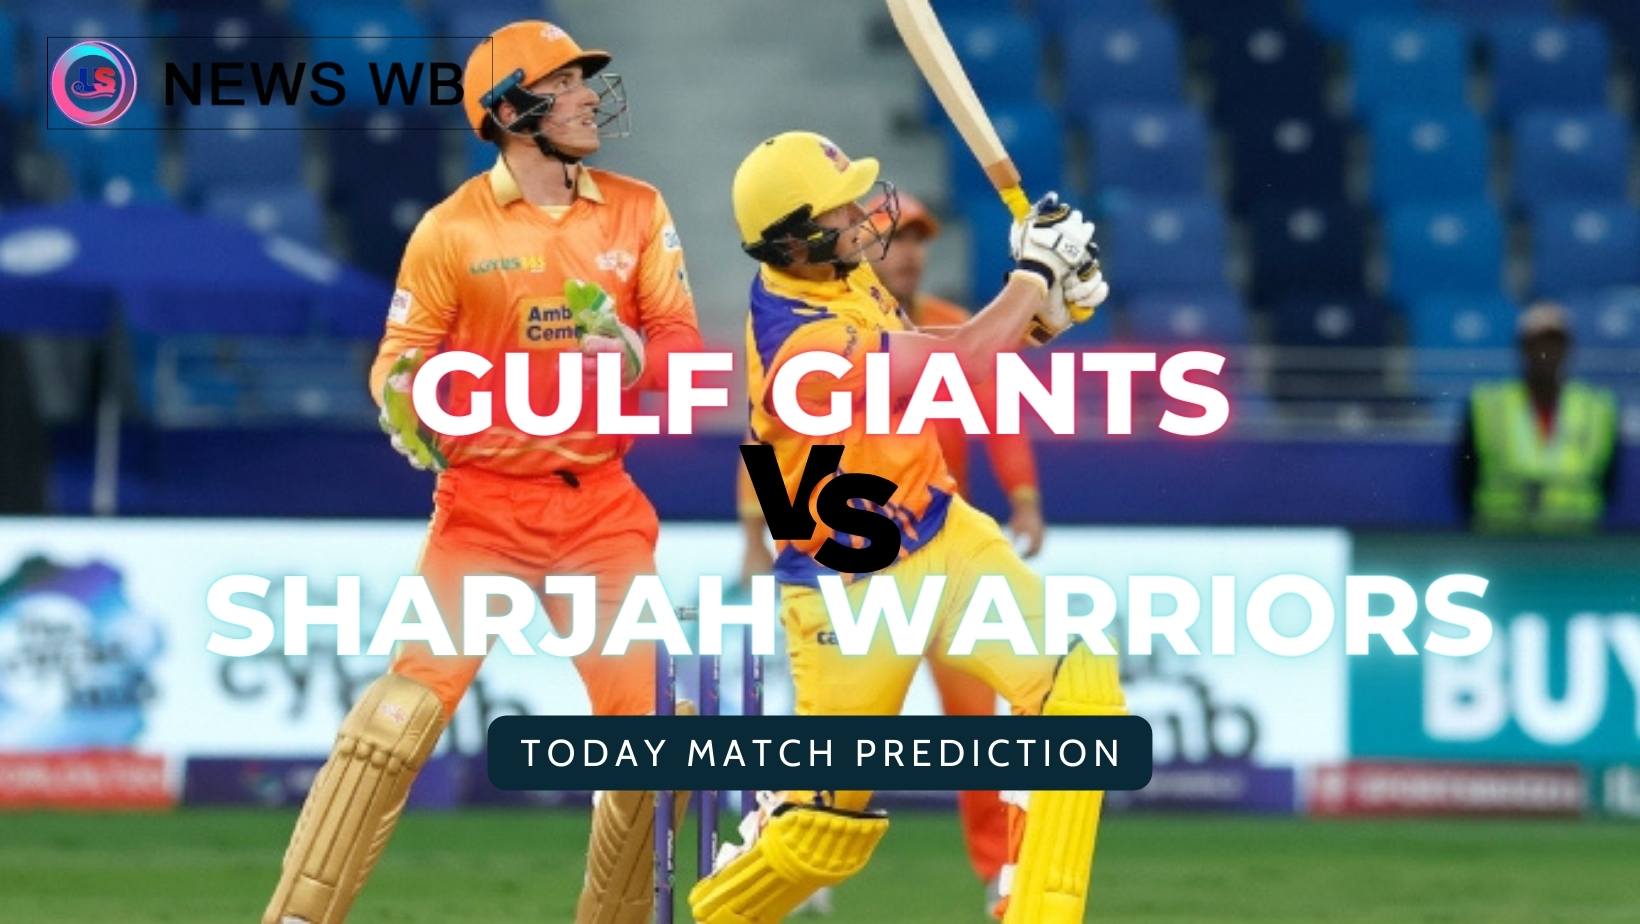 Today Match Prediction: GG vs SW Dream11 Team, Gulf Giants vs Sharjah Warriors 22nd Match, Who Will Win?